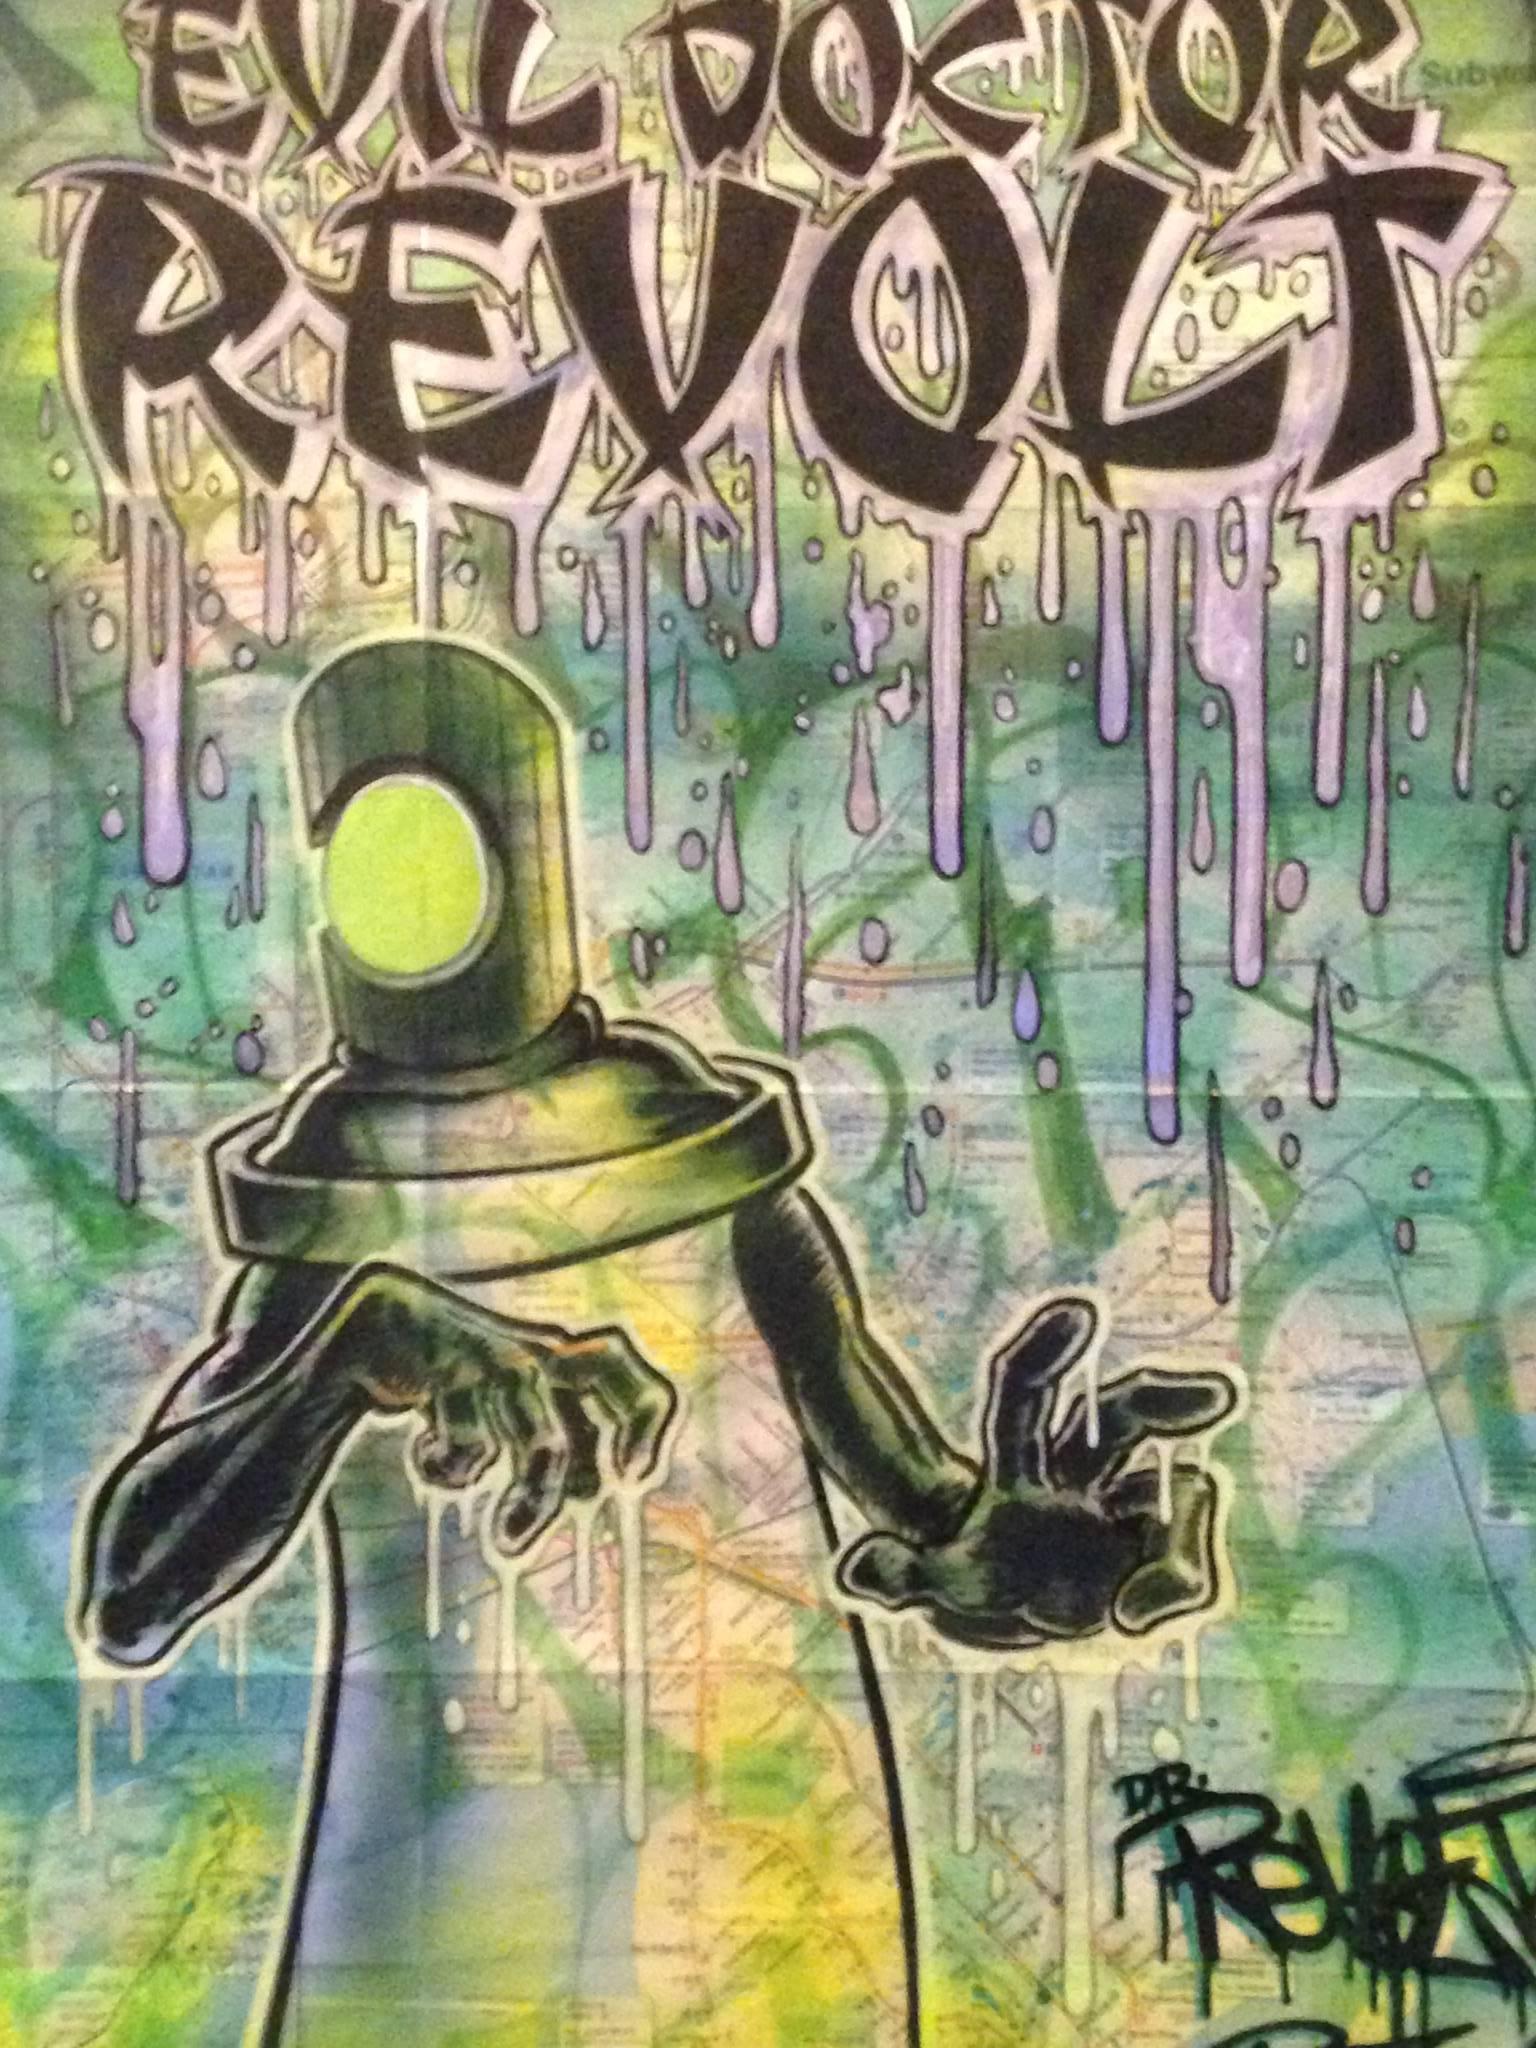 Kung Fu Can Man - Painting by Dr. Revolt